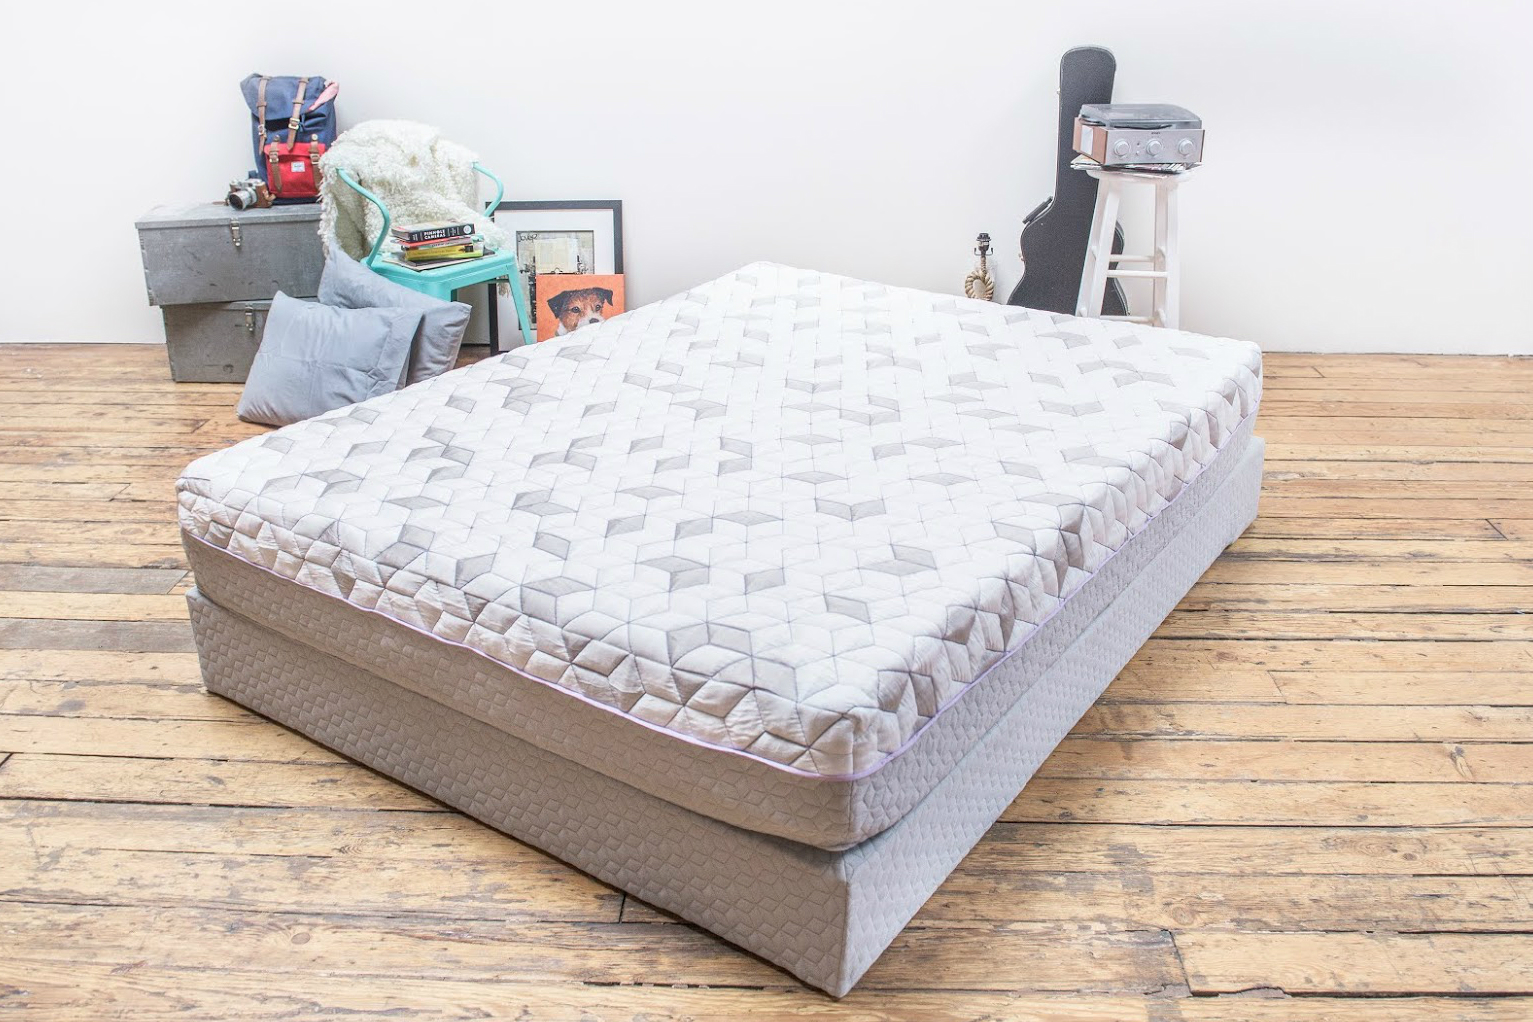 layla launches its mattress delivery kickstarter on box spring